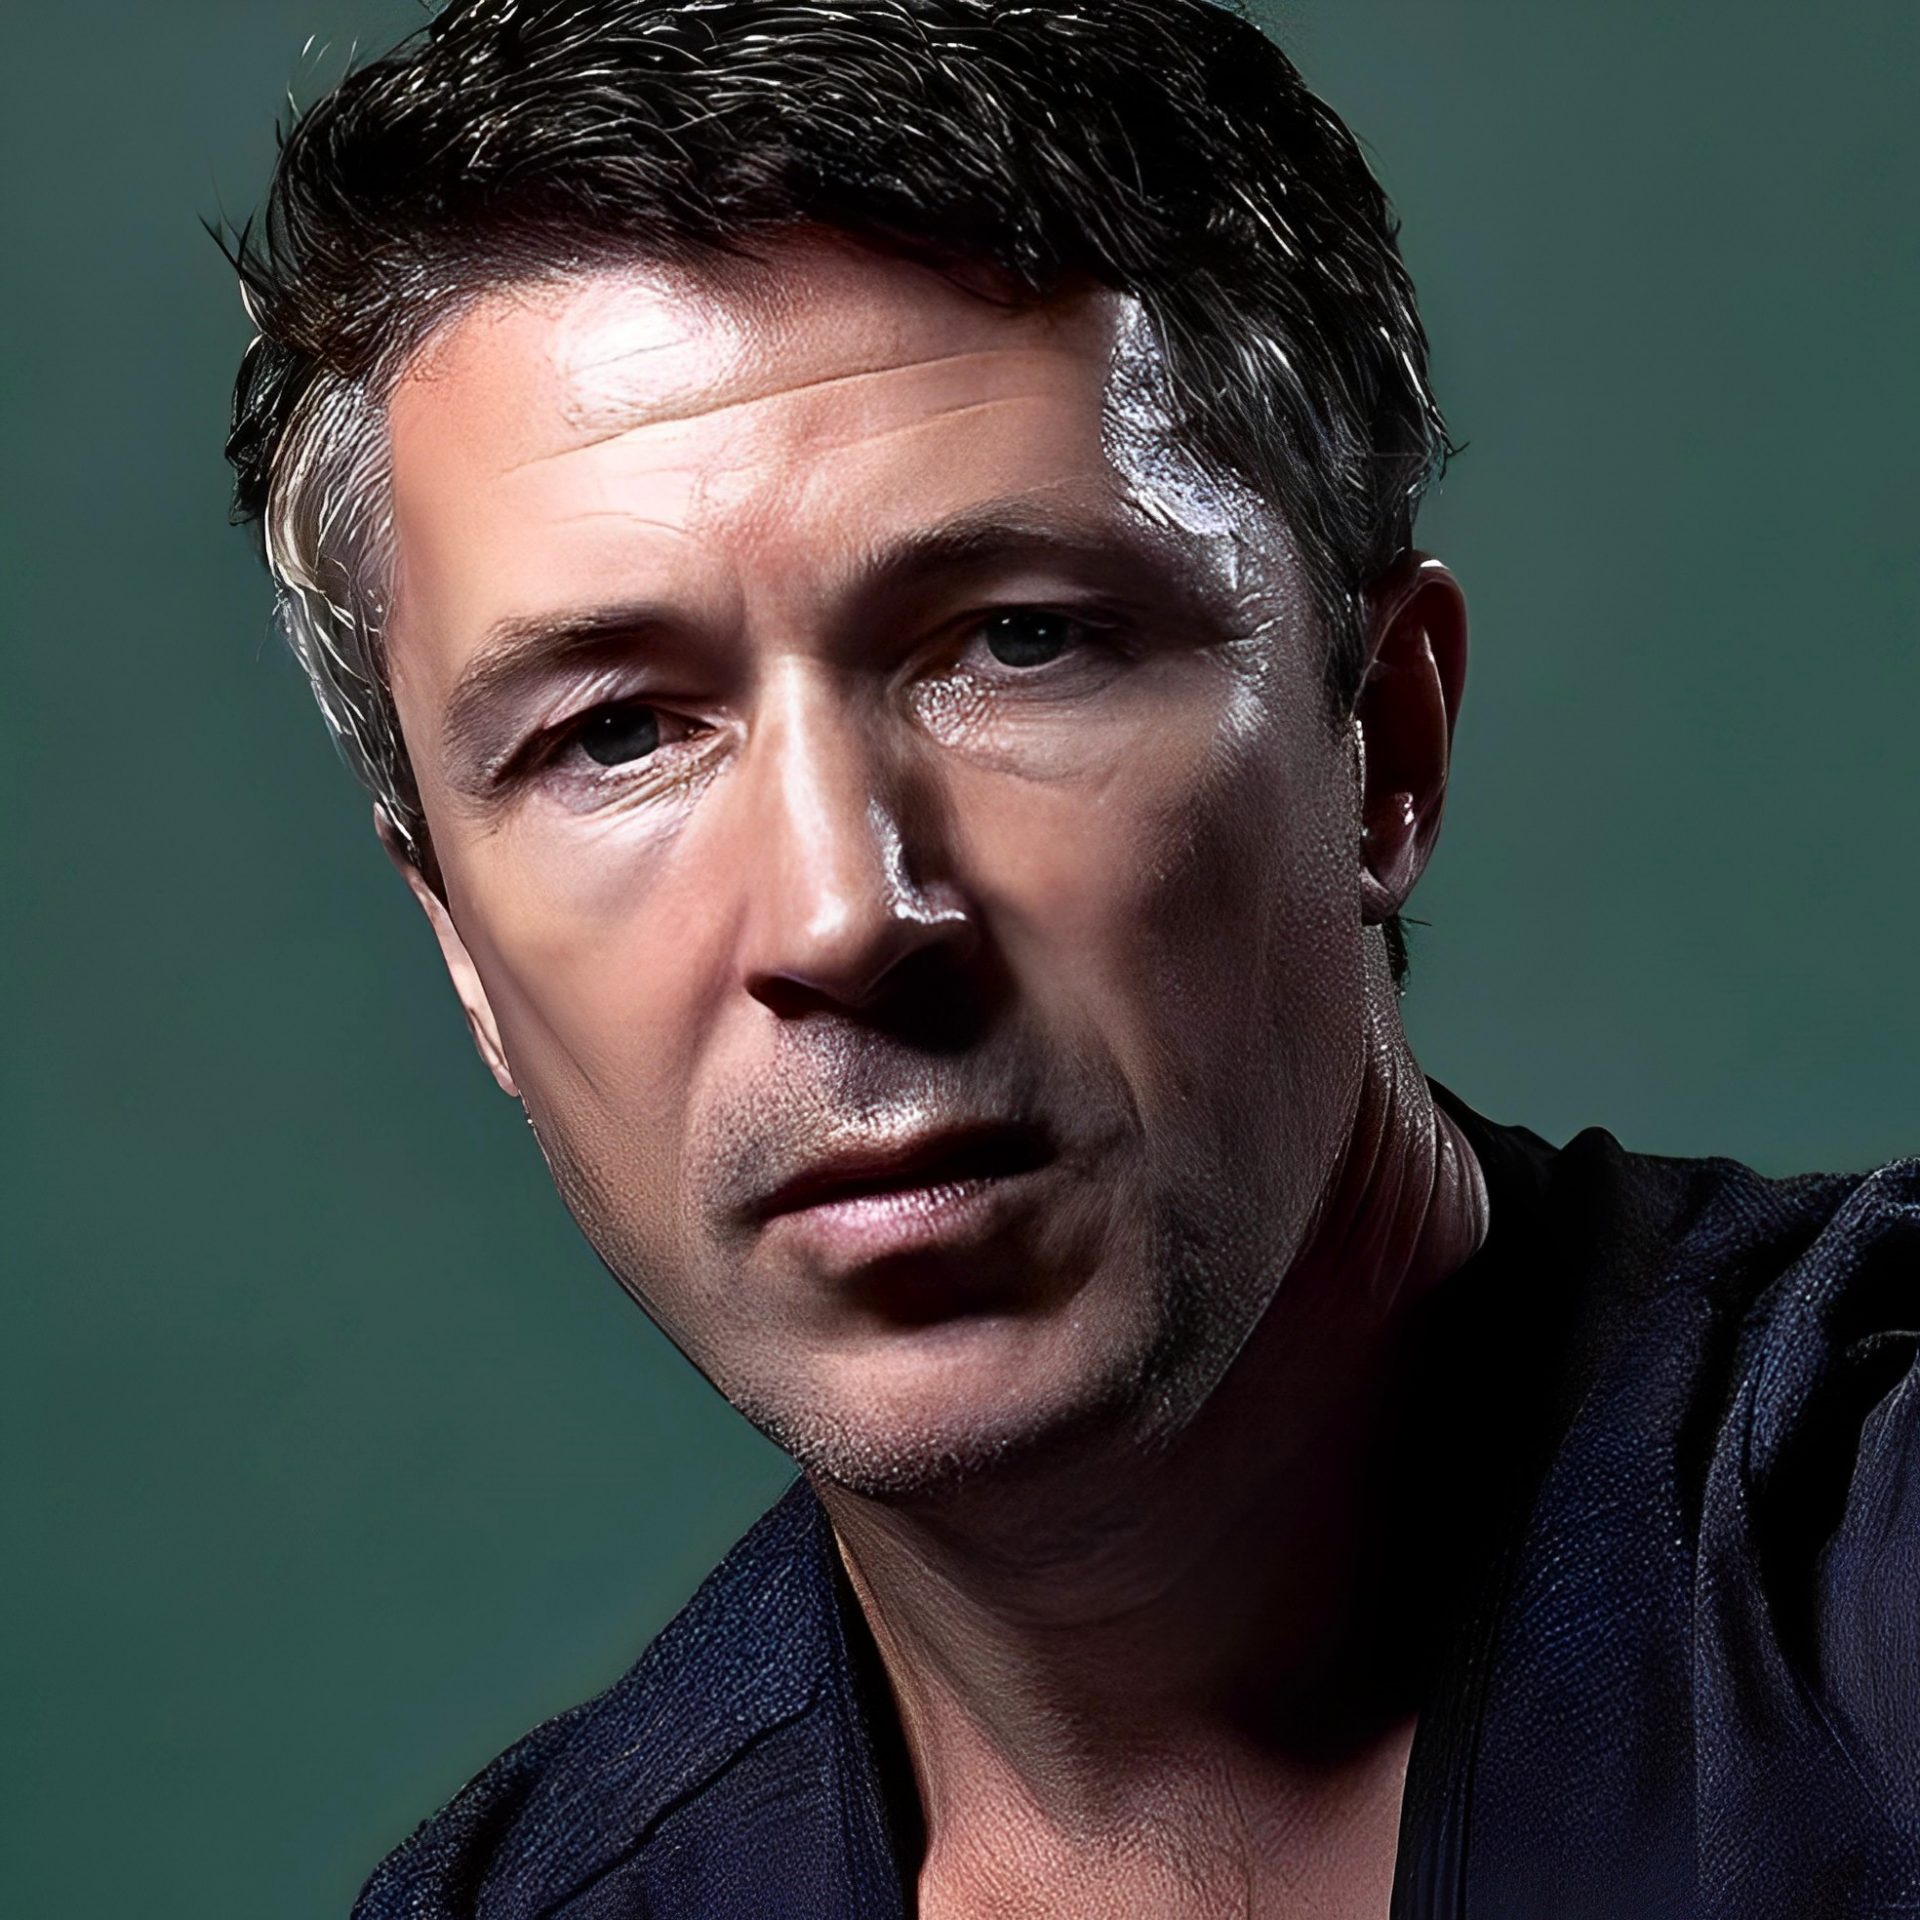 Aidan Gillen A Captivating Collection Of Photos Showcasing The Versatility And Charisma Of A 